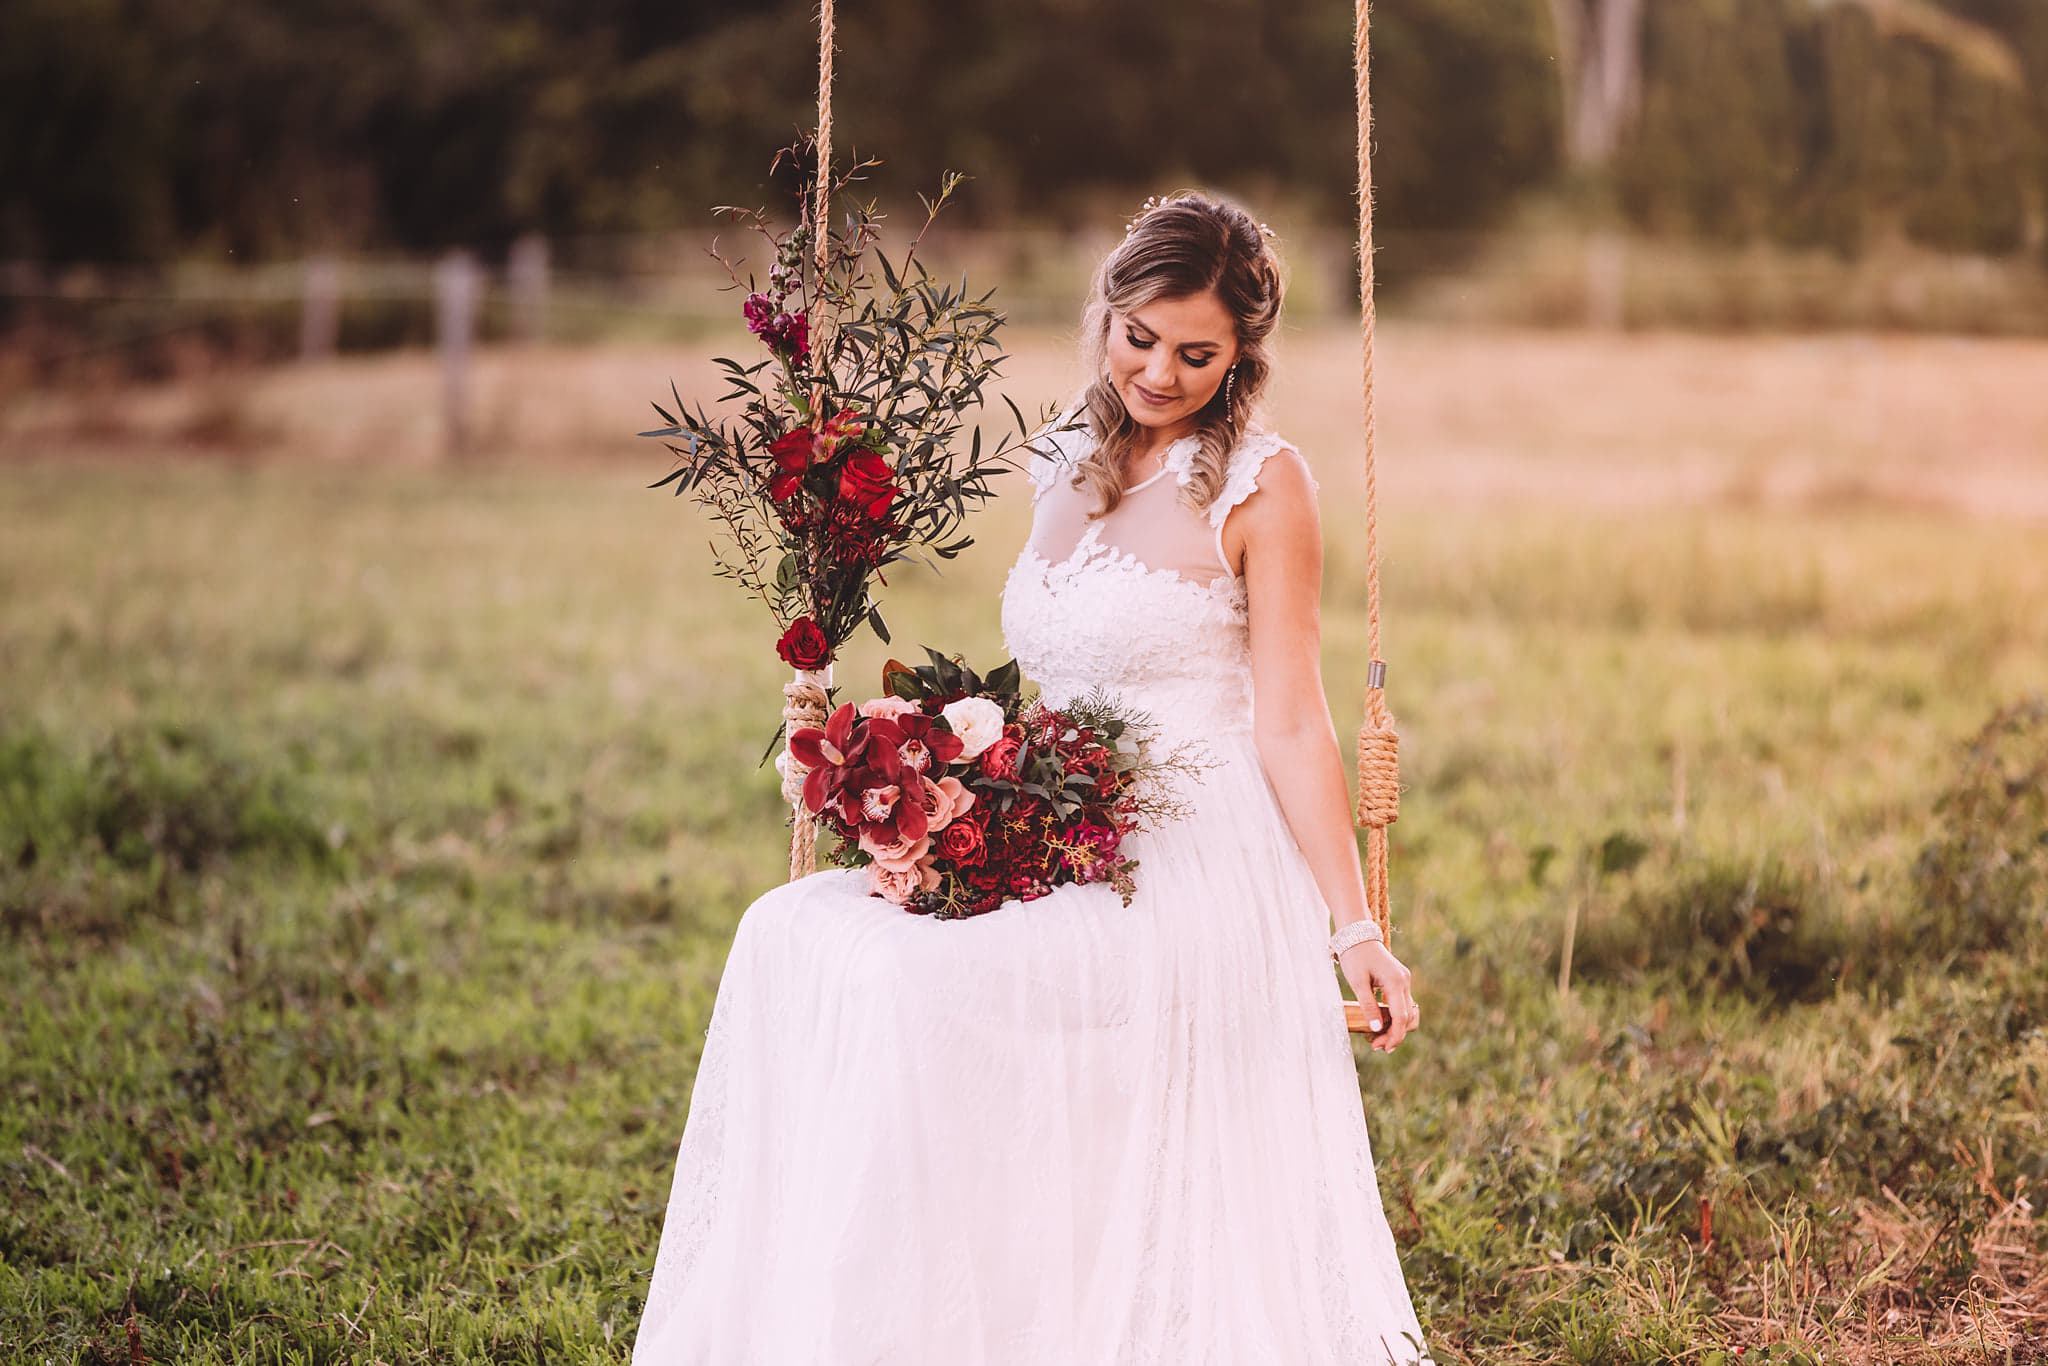 bride with vibrant bouquet on wooden swing